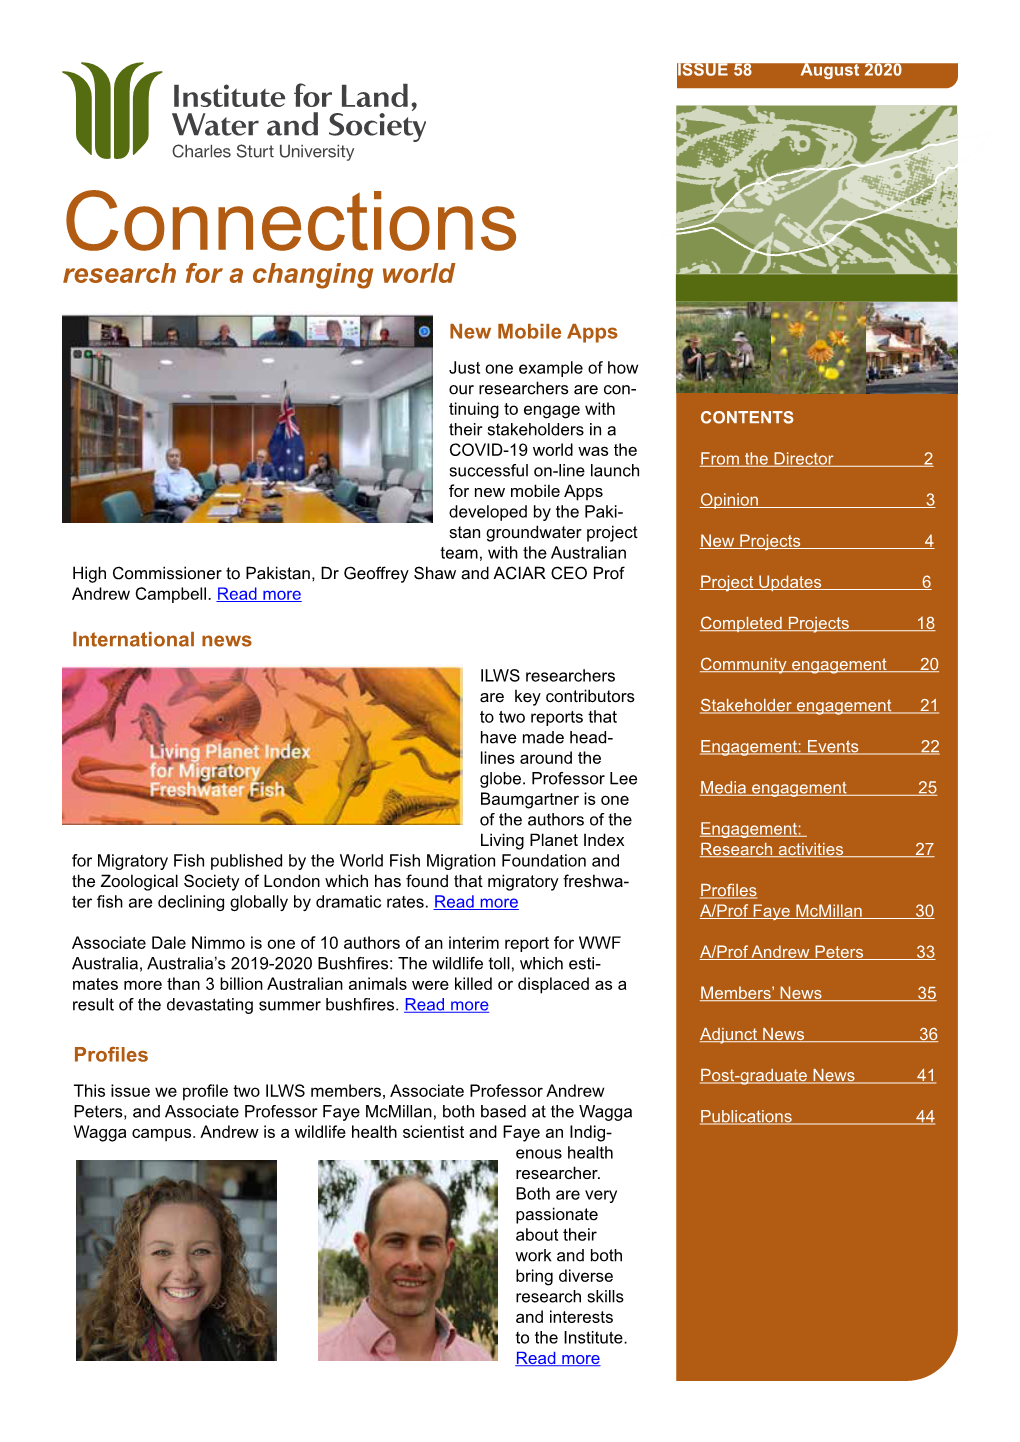 Connections Issue 58